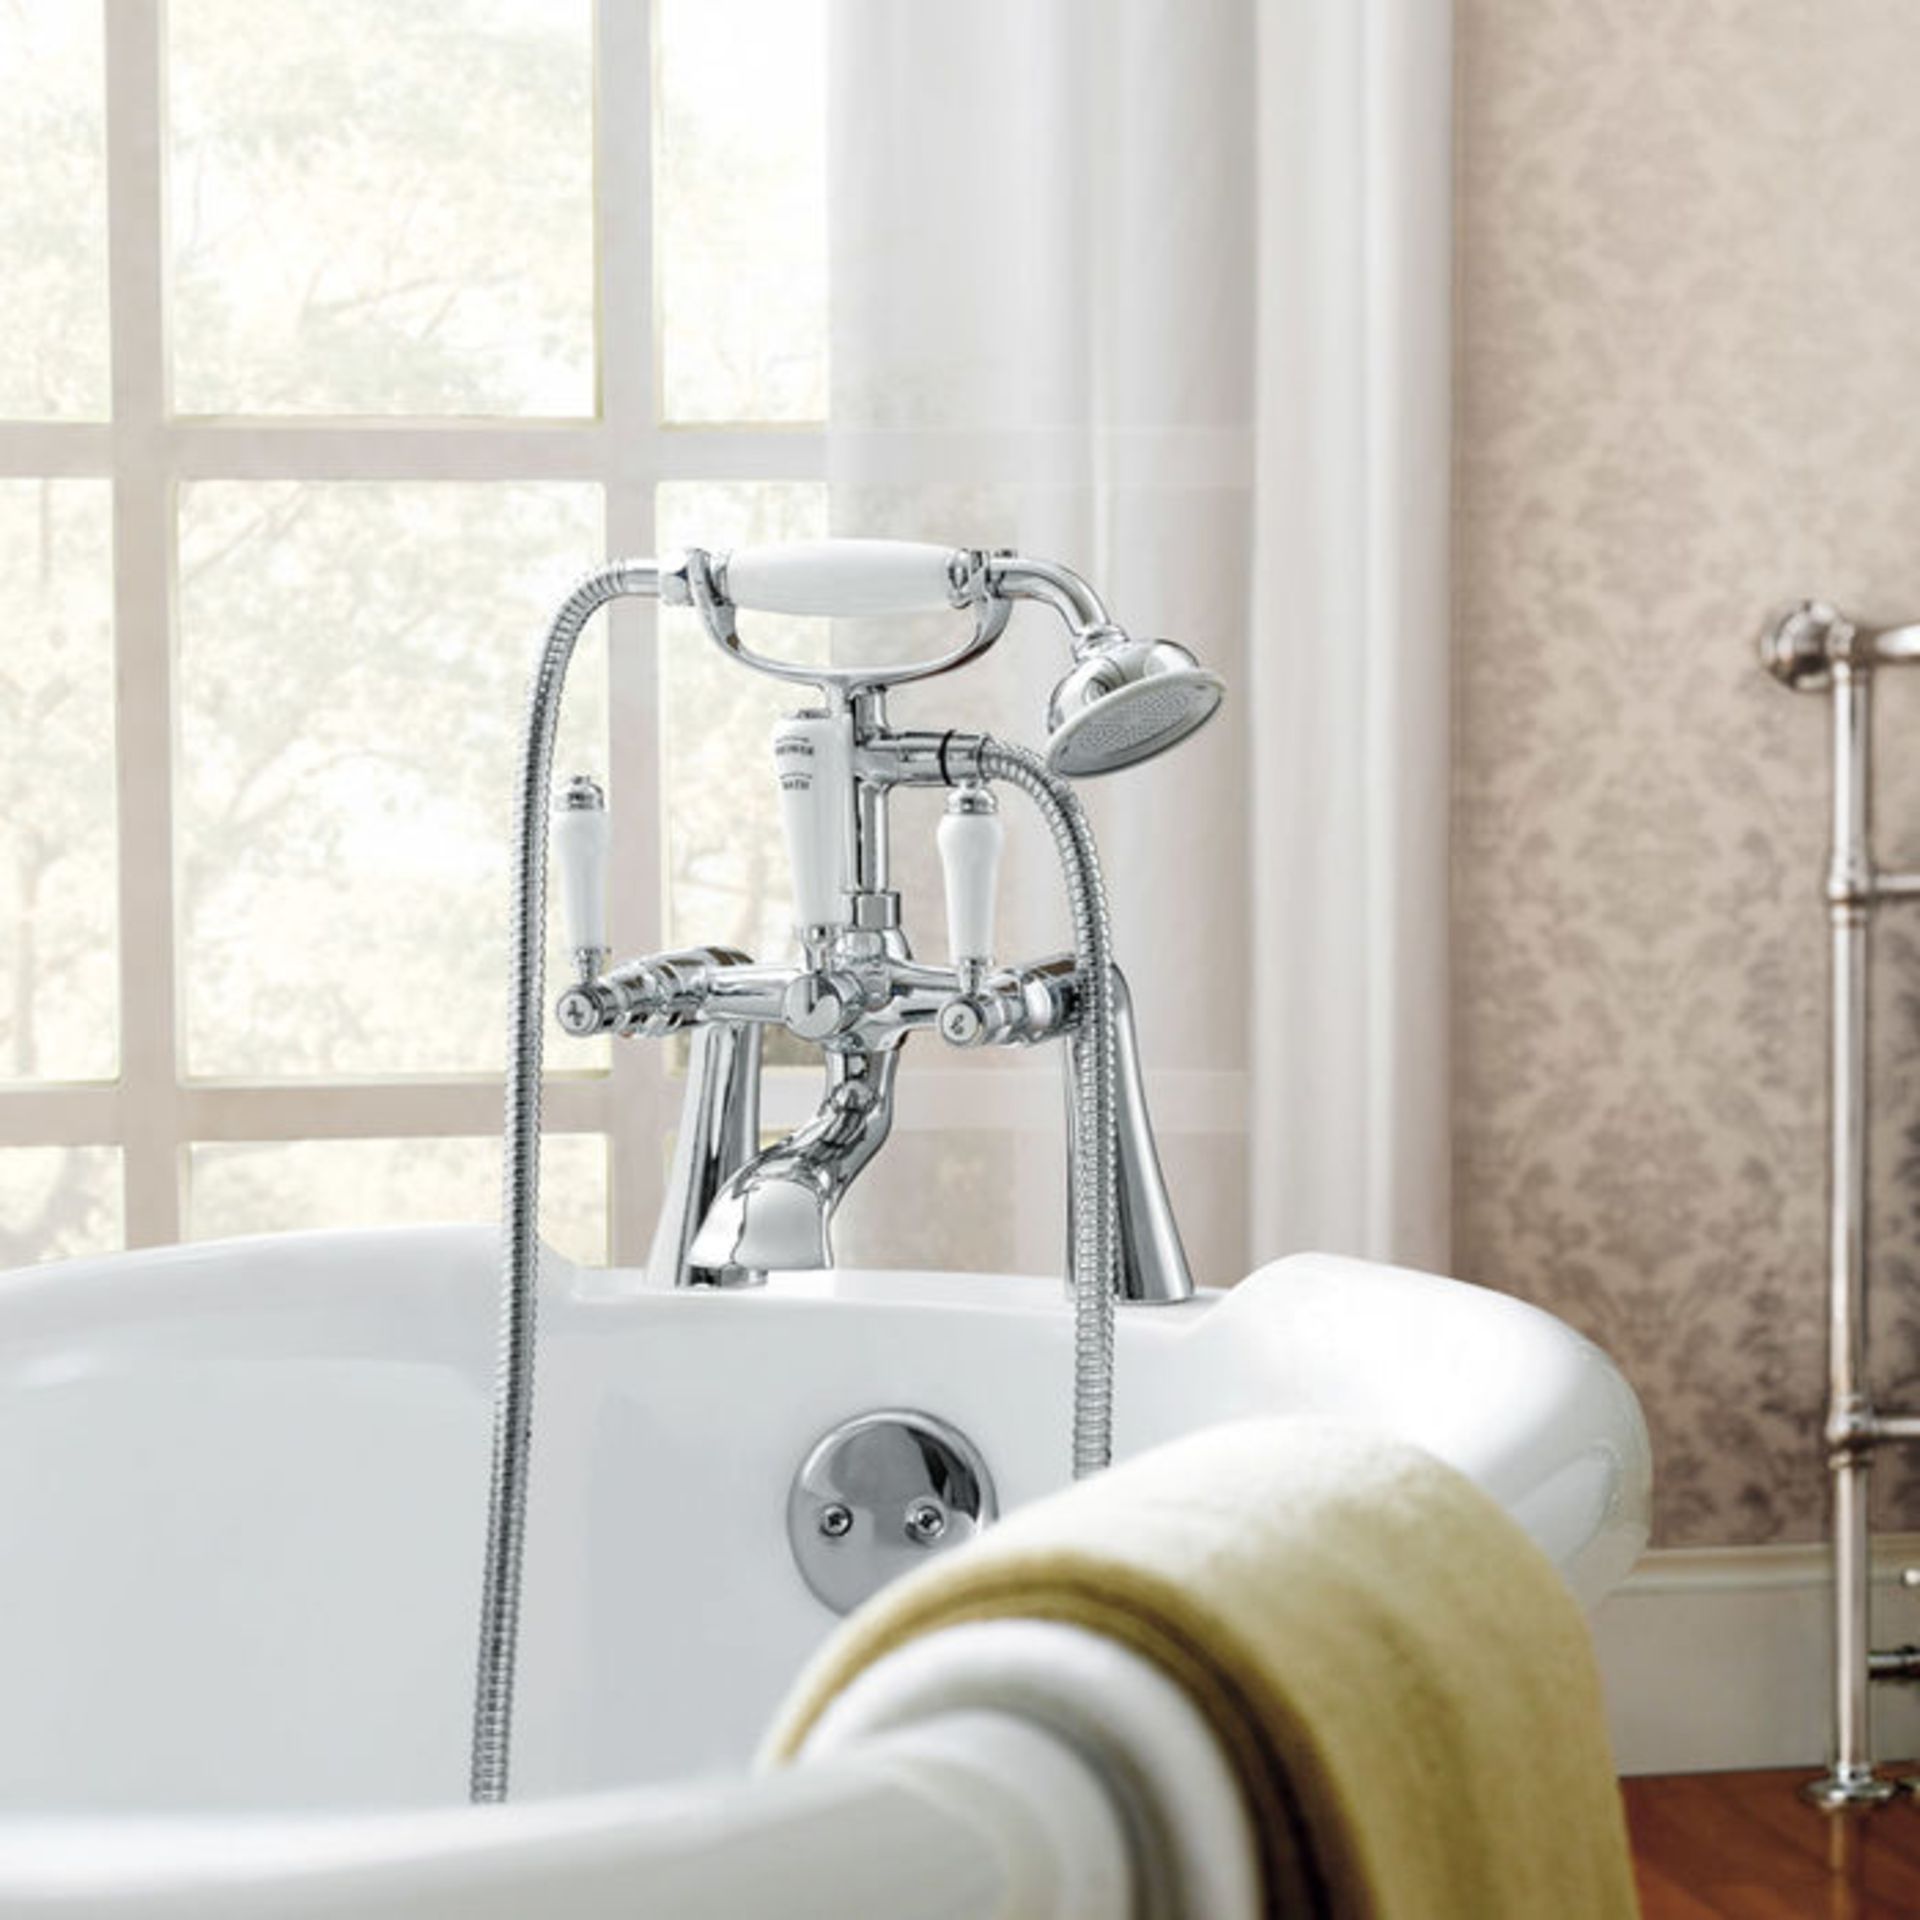 (AL29) Regal Chrome Traditional Bath Mixer Lever Tap with Hand Held Shower. Chrome Plated Solid - Image 3 of 4